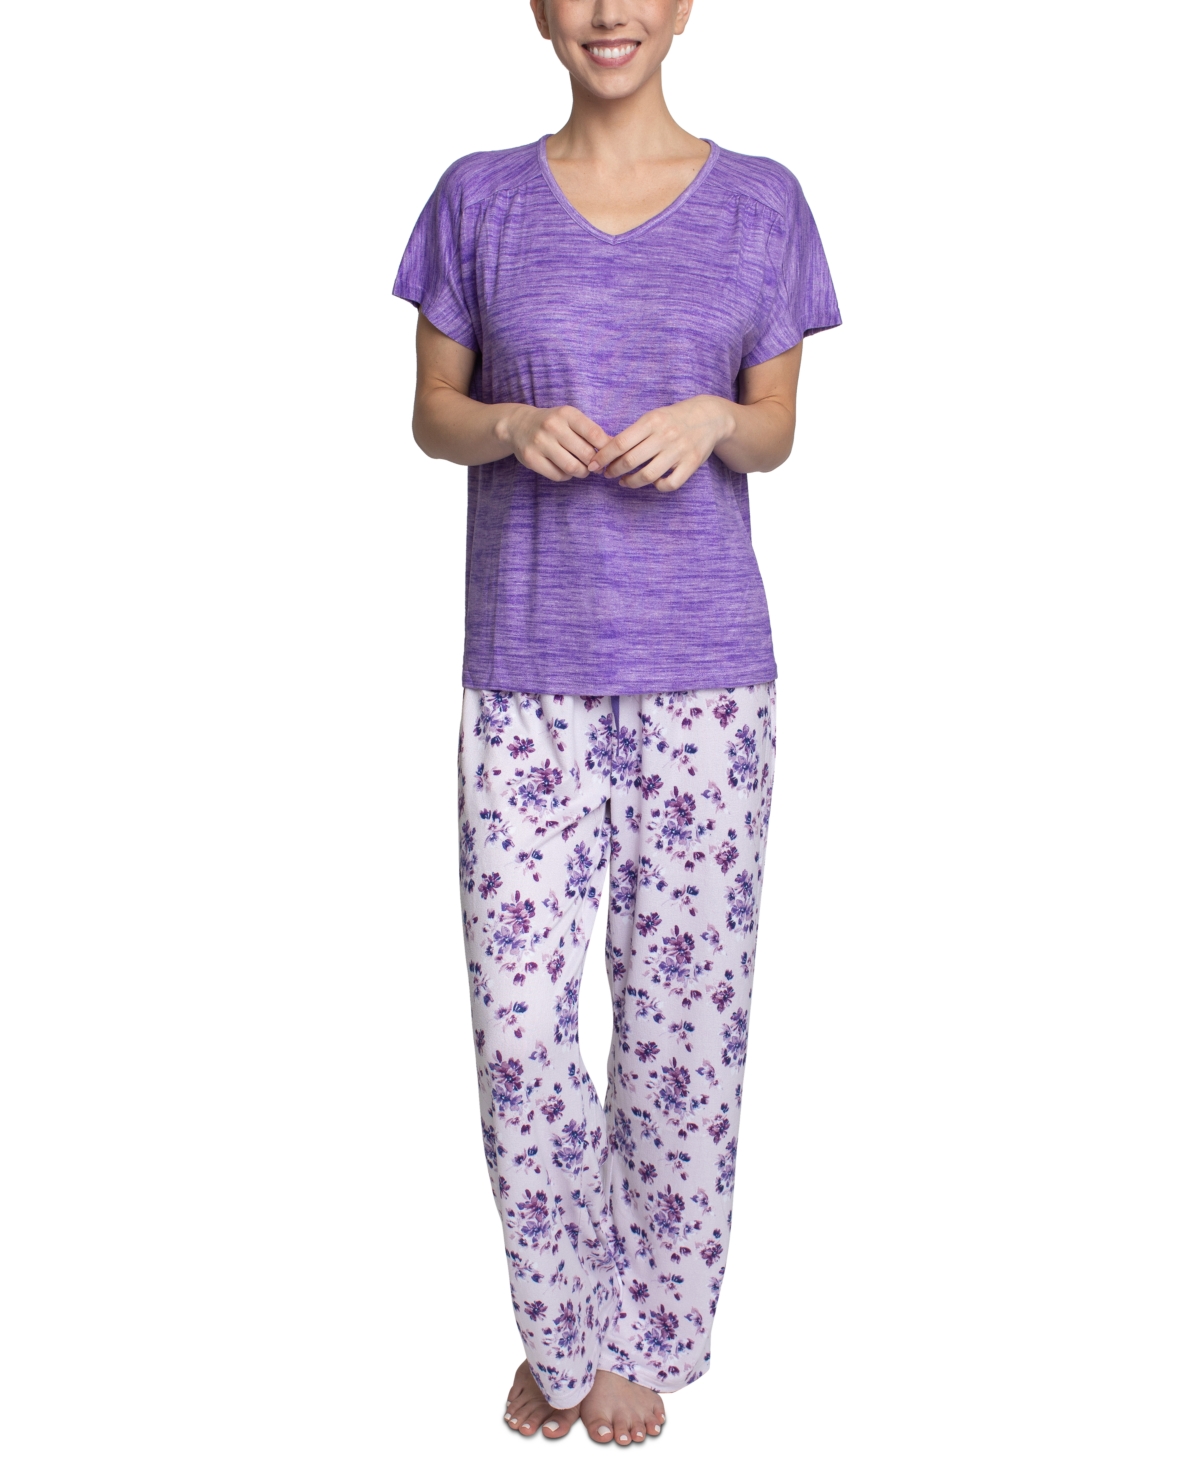 Hanes Women's Relaxed Butter-Knit Short Sleeve Pajama Set